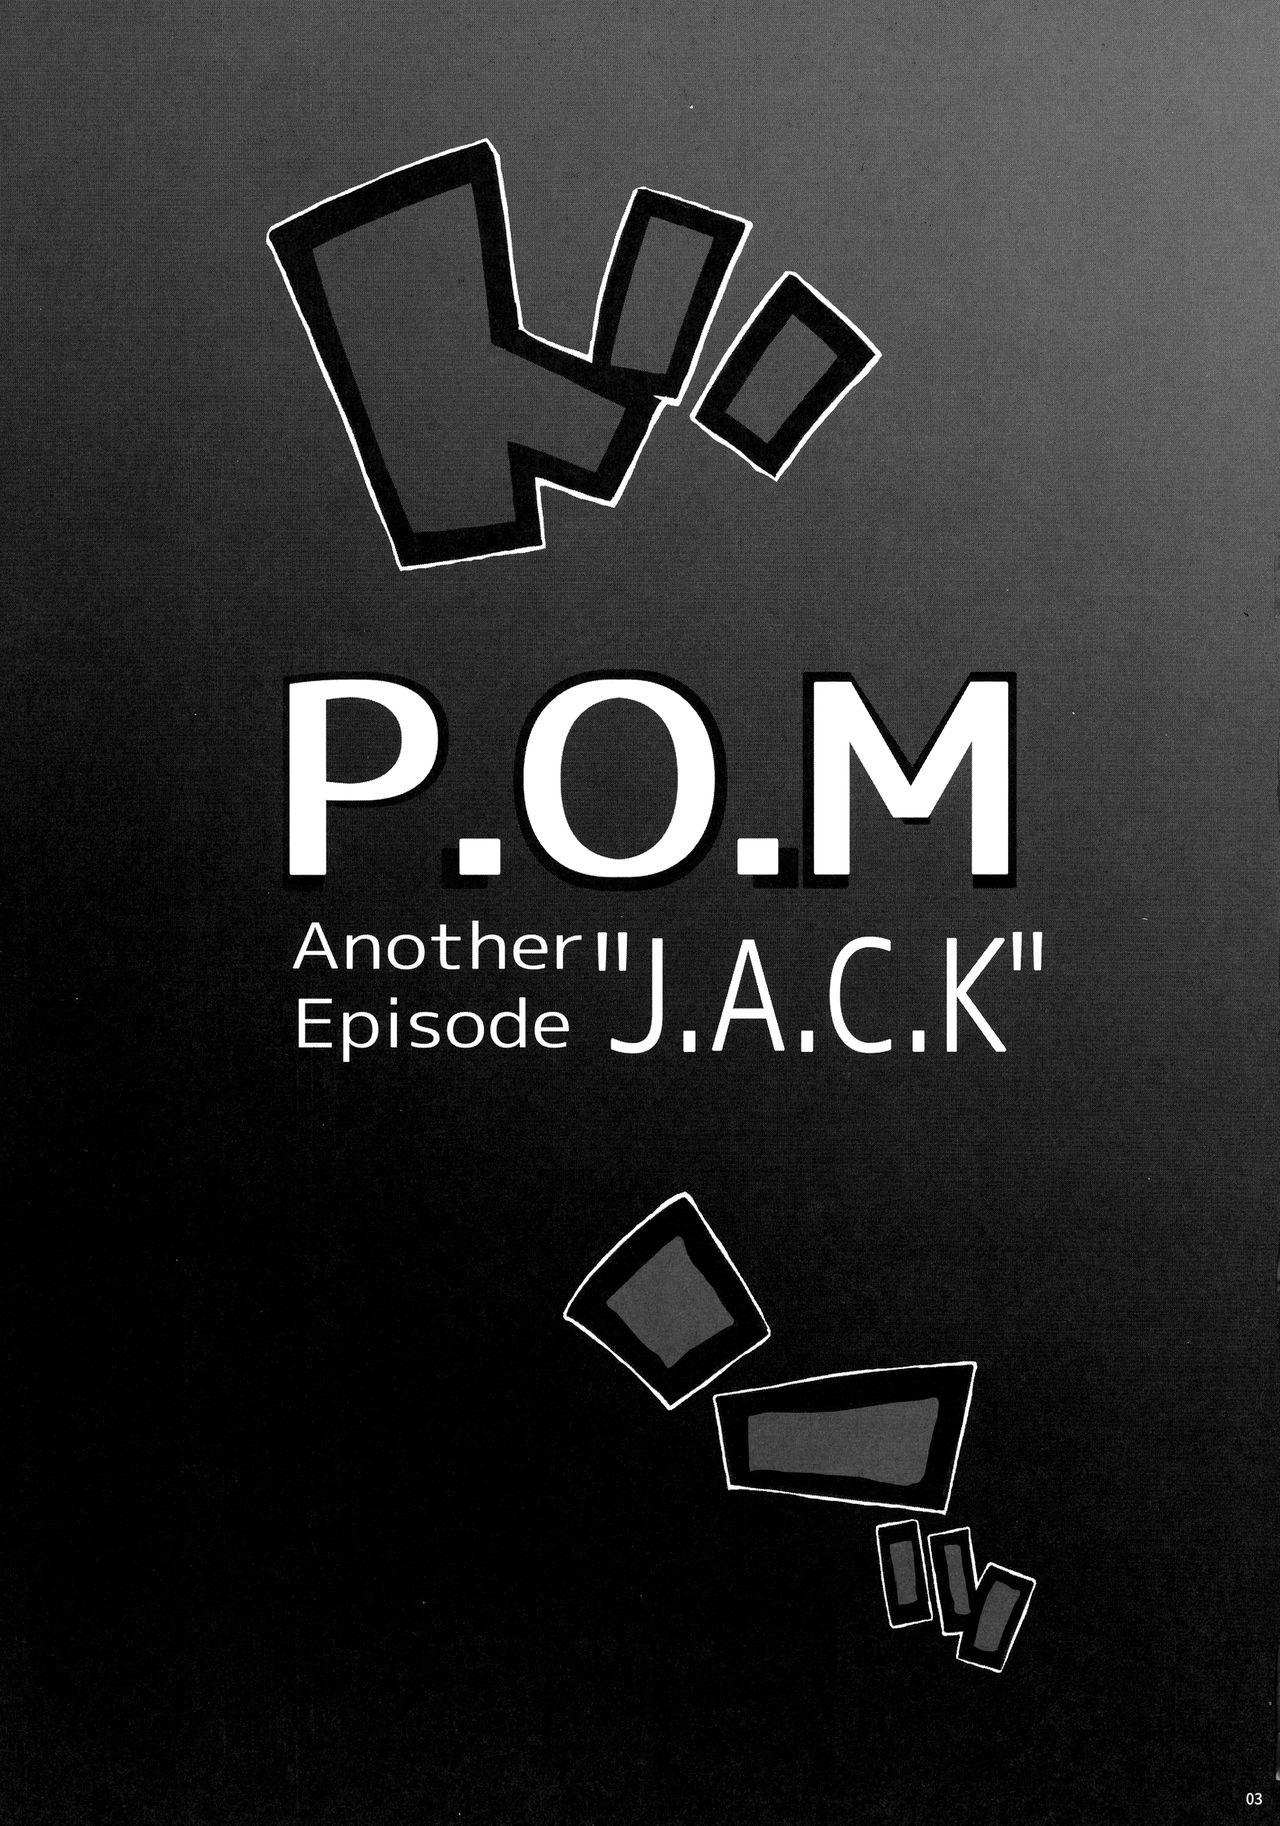 P.O.M Another Episode "J.A.C.K" 5